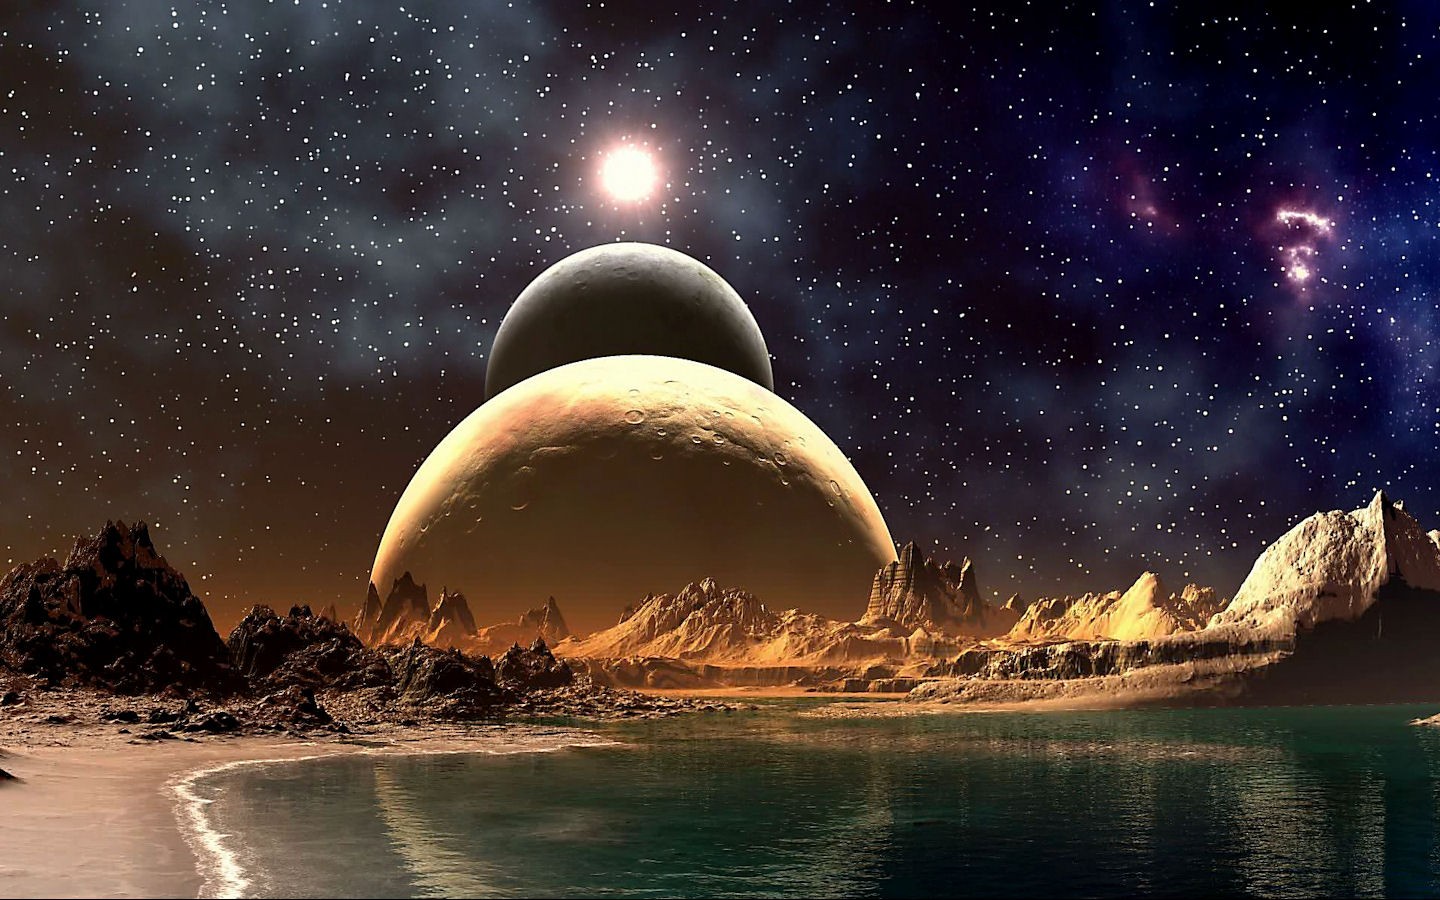  planets science fiction photomanipulations fresh new hd wallpaper best 1440x900